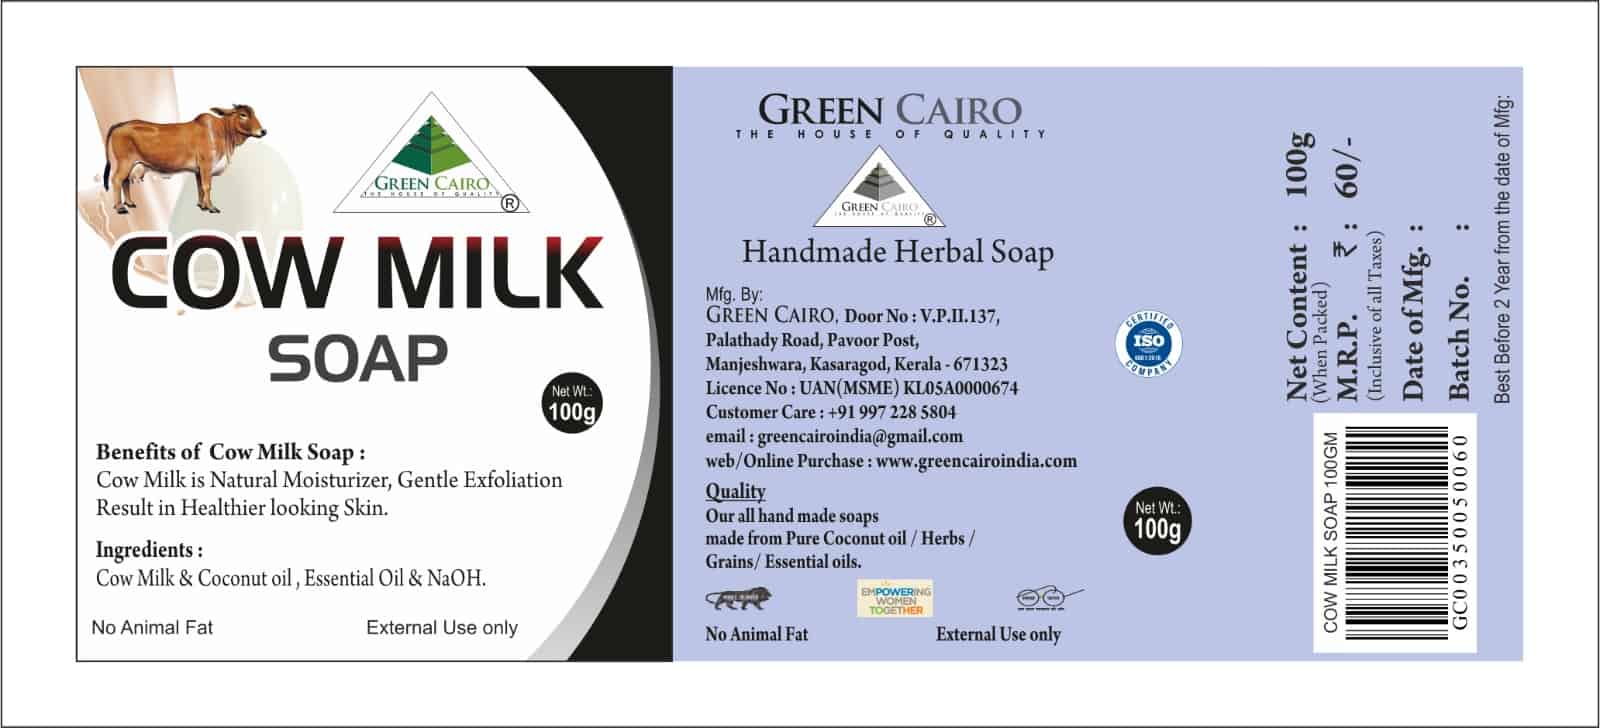 Cow Milk Soap 100g benefits helps to cure Infections and allergies - Green  Cairo